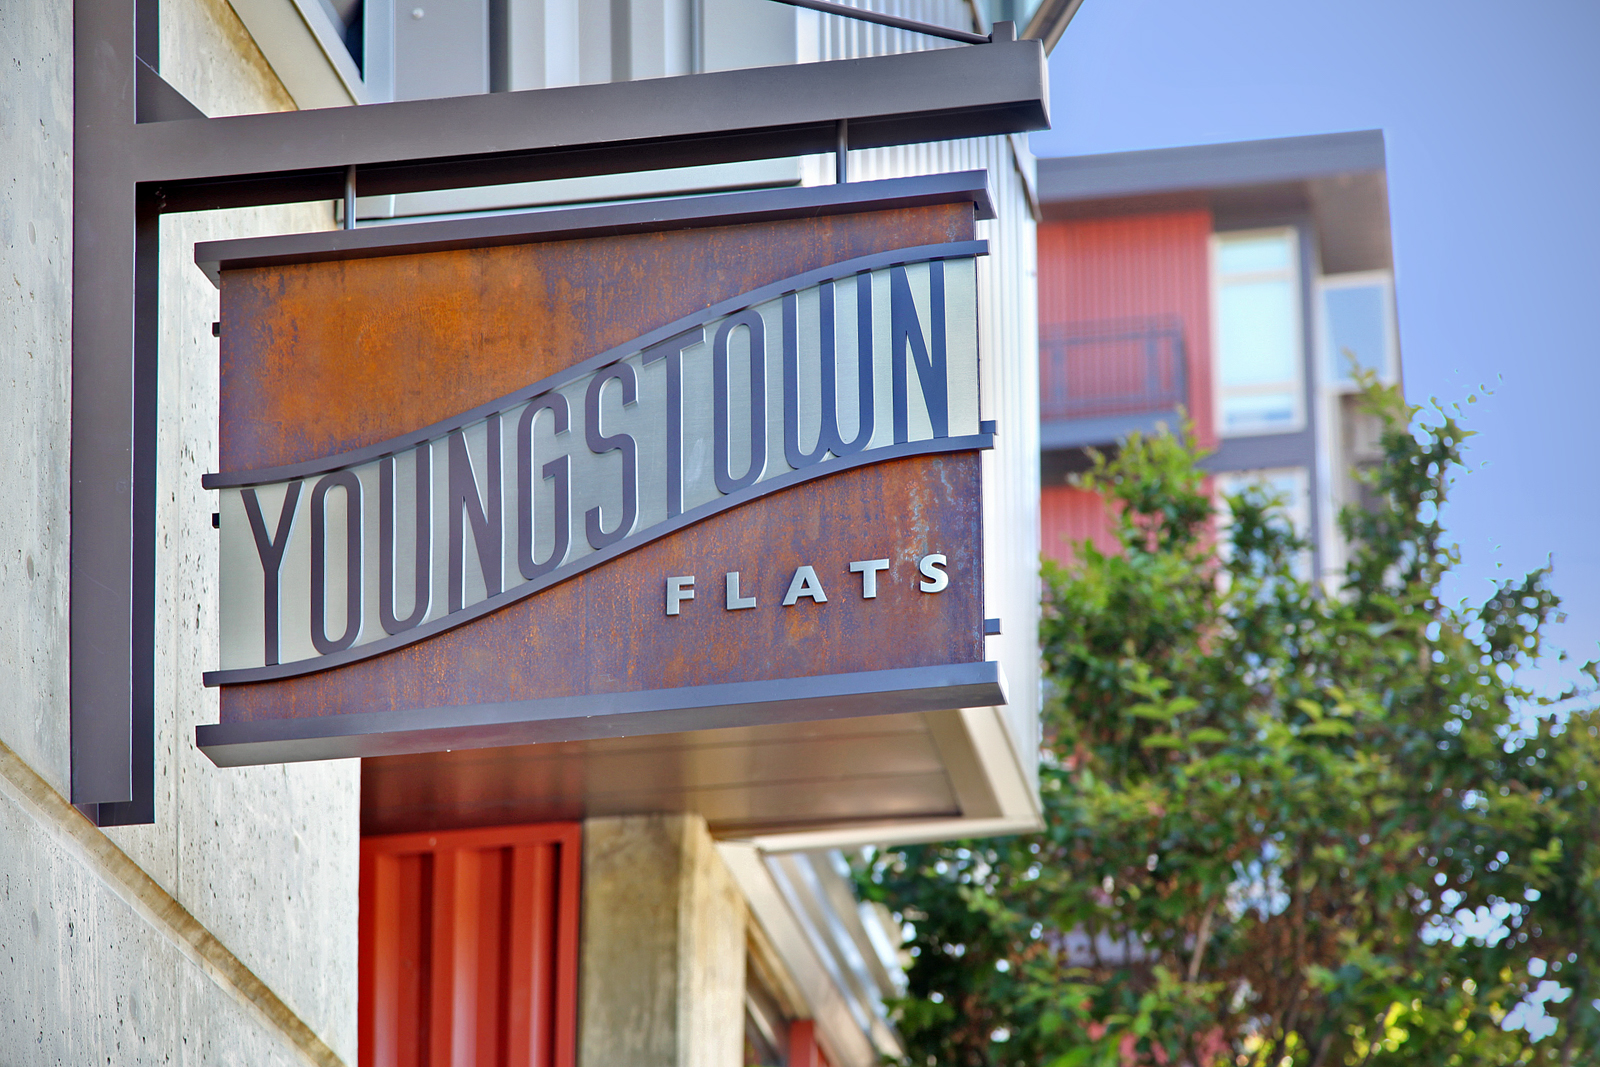 Youngstown Flats